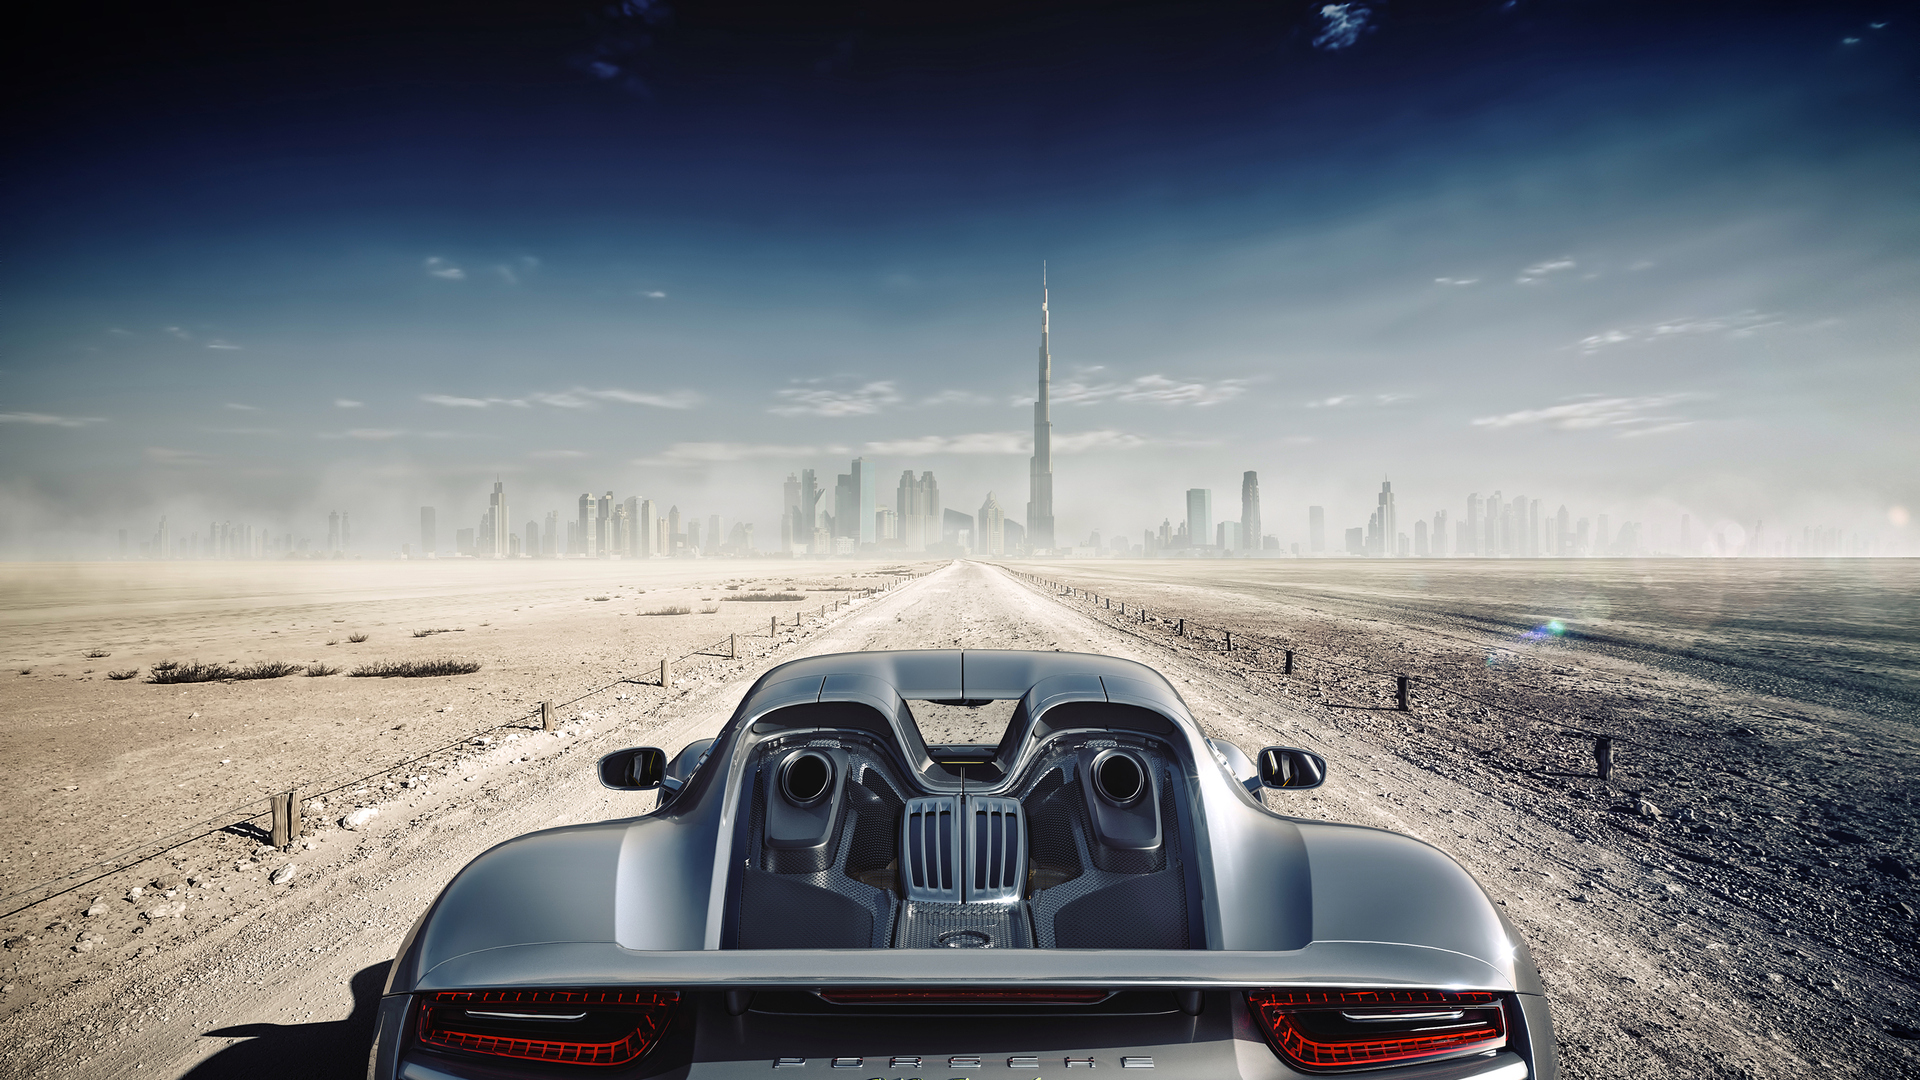 1920x1080 Porsche 918 Spyder In Dubai Laptop Full Hd 1080p Hd 4k Wallpapers Images Backgrounds Photos And Pictures